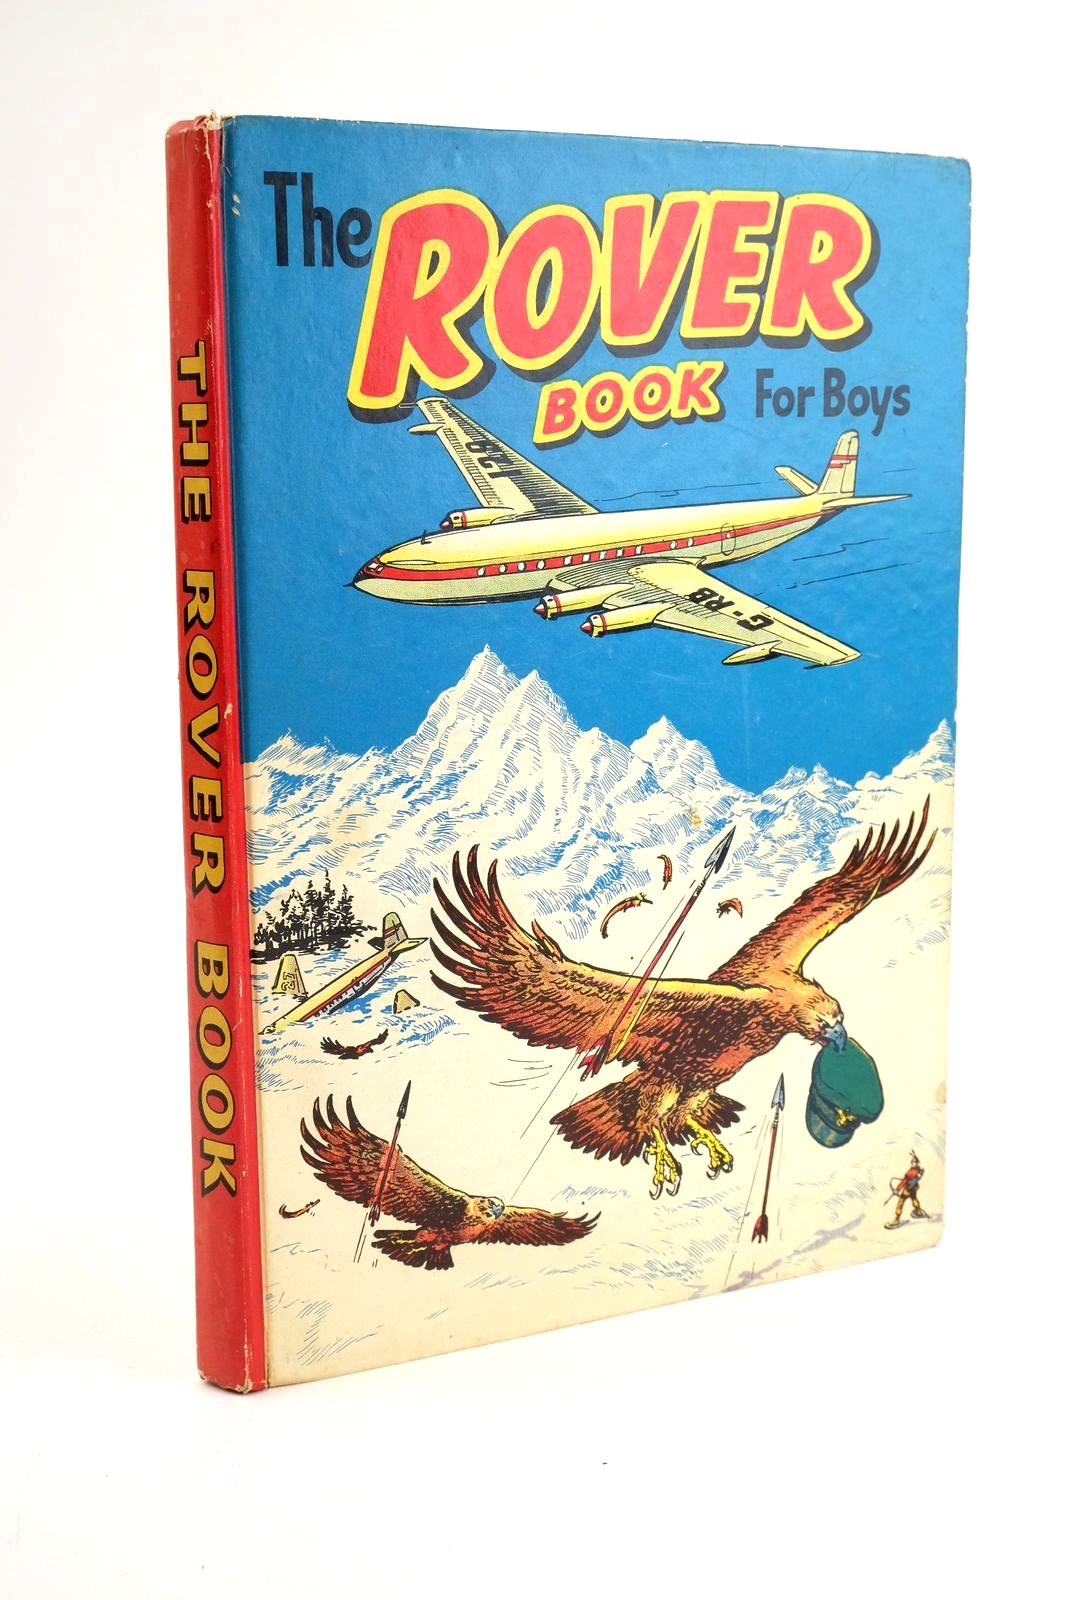 Photo of THE ROVER BOOK FOR BOYS 1959 published by D.C. Thomson &amp; Co Ltd. (STOCK CODE: 1323569)  for sale by Stella & Rose's Books